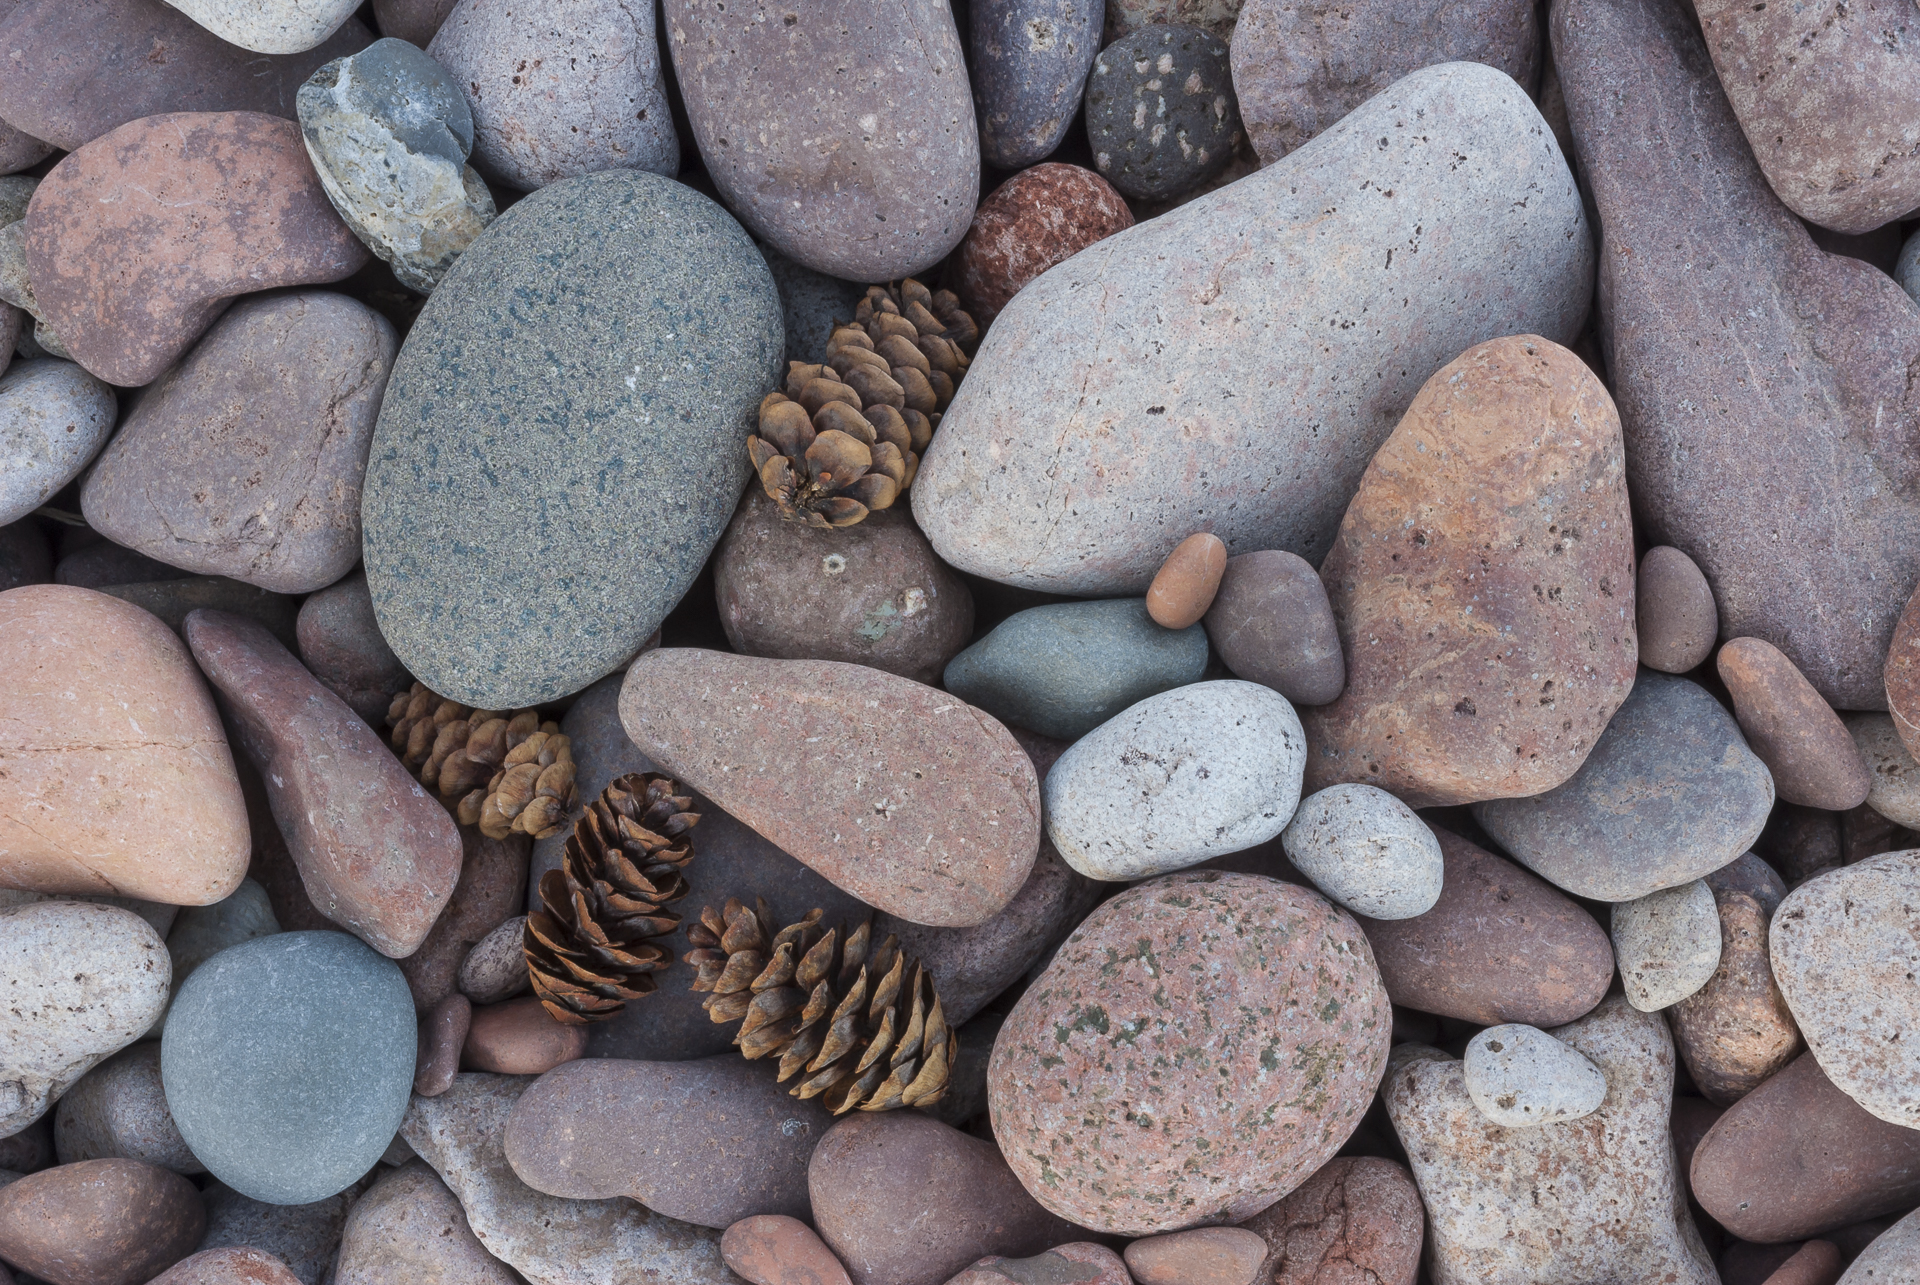 Beach pebbles and spruce cones